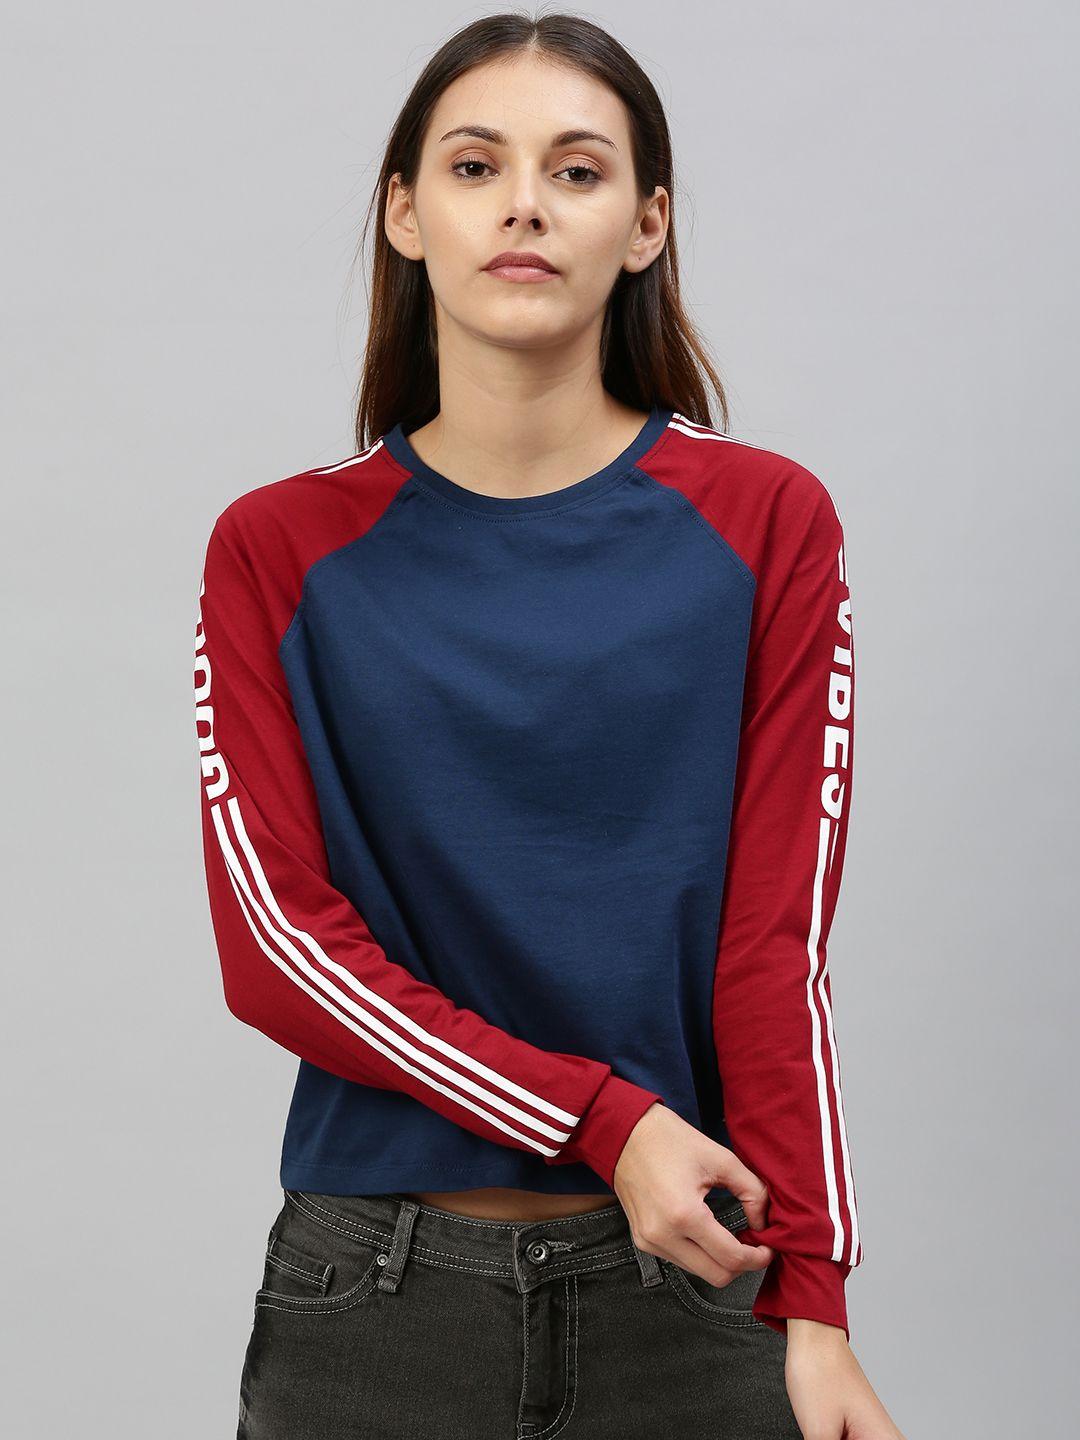 the-roadster-lifestyle-co-women-navy-blue-solid--round-neck-top-with-contrast-raglan-sleeves